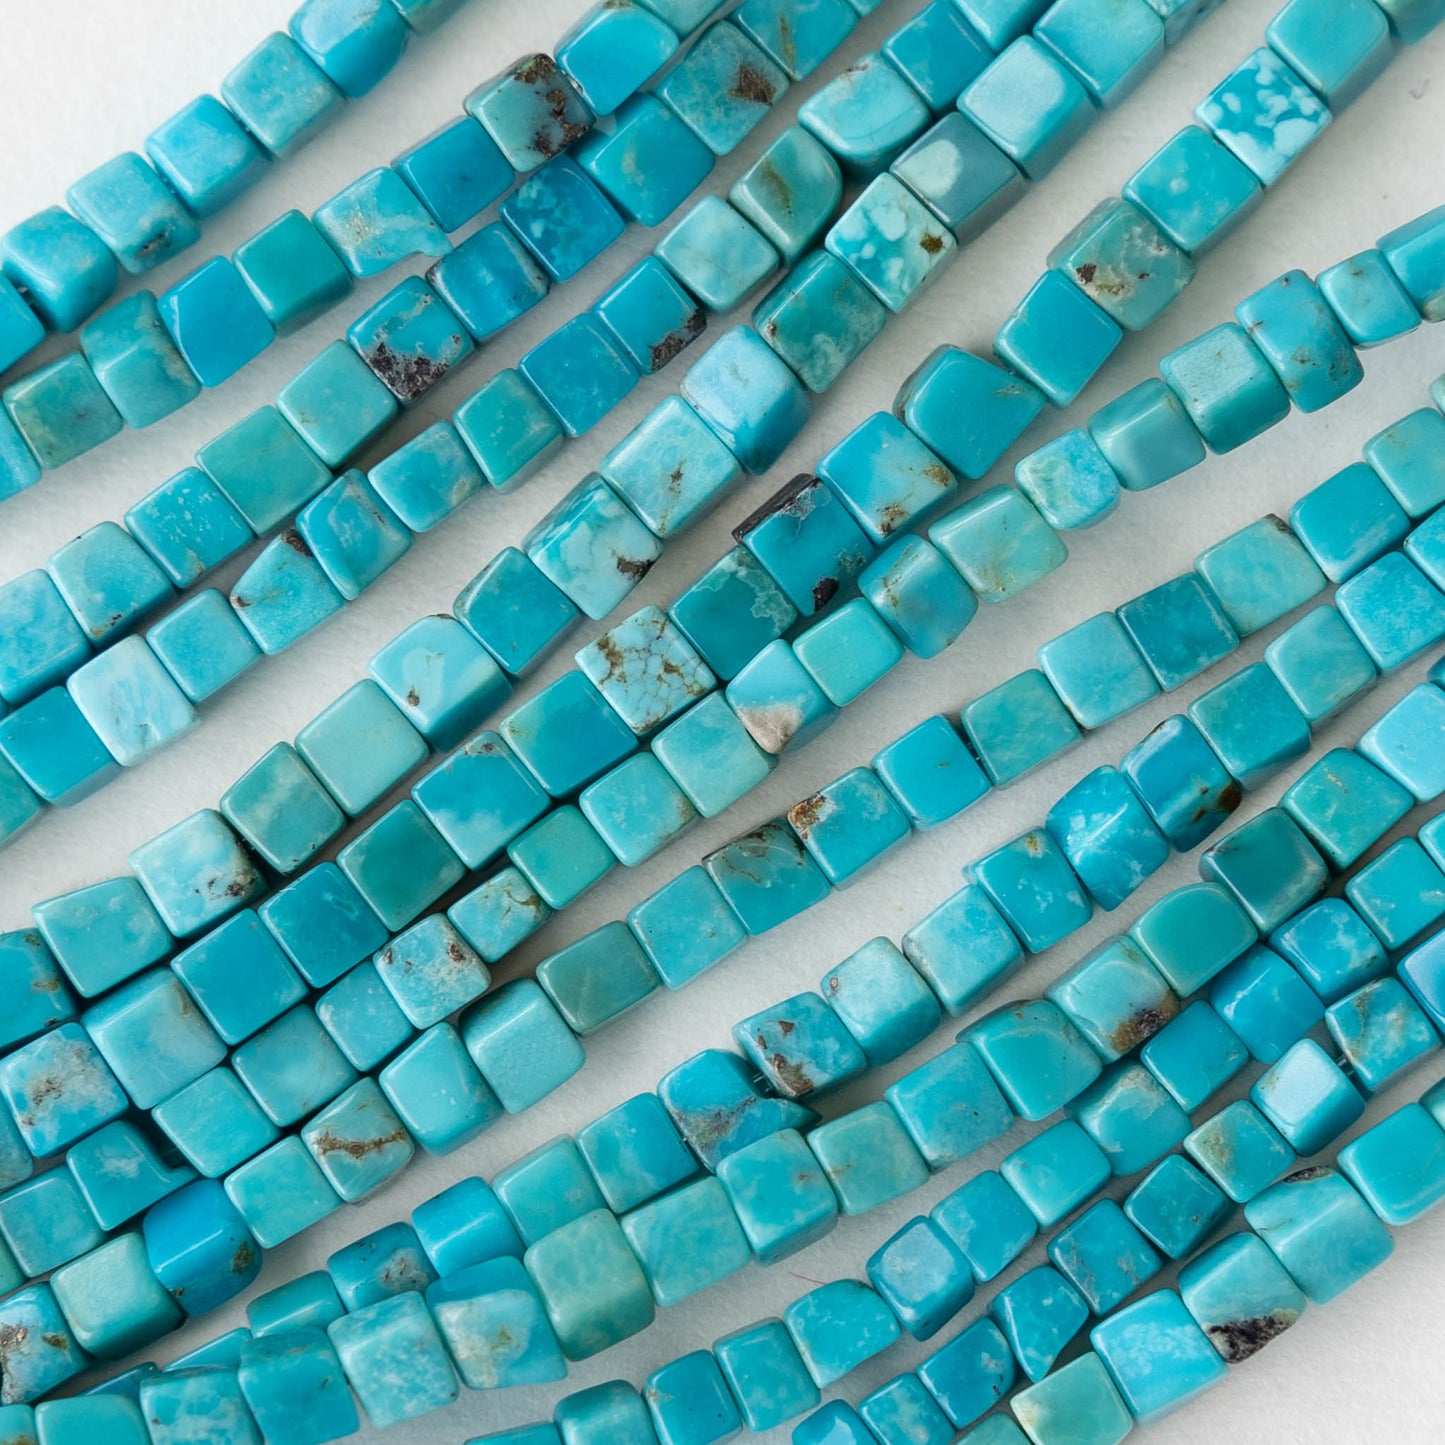 3mm Cube Beads - Turquoise - 16 inches